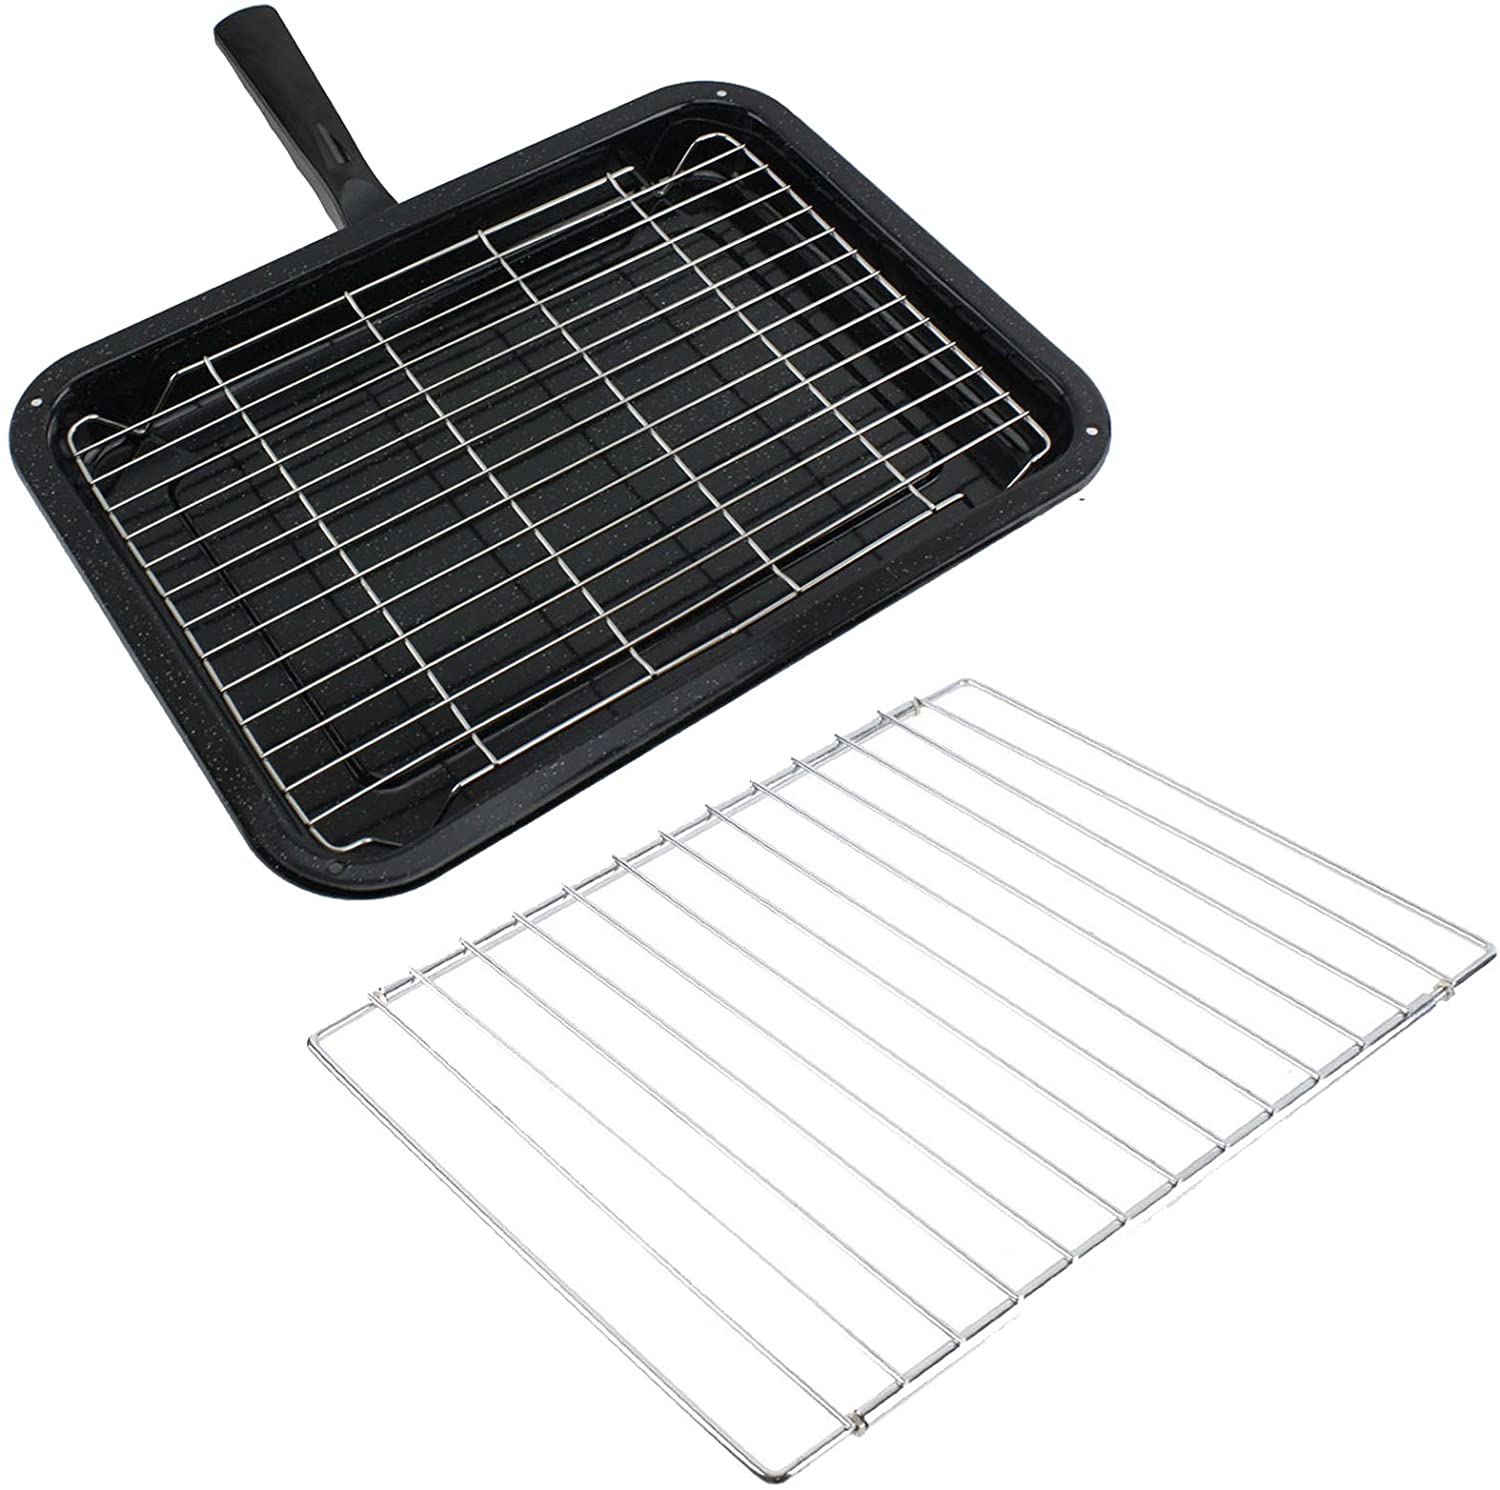 Small Grill Pan with Rack and Detachable Handle + Adjustable Grill Shelf for NEFF Oven Cooker